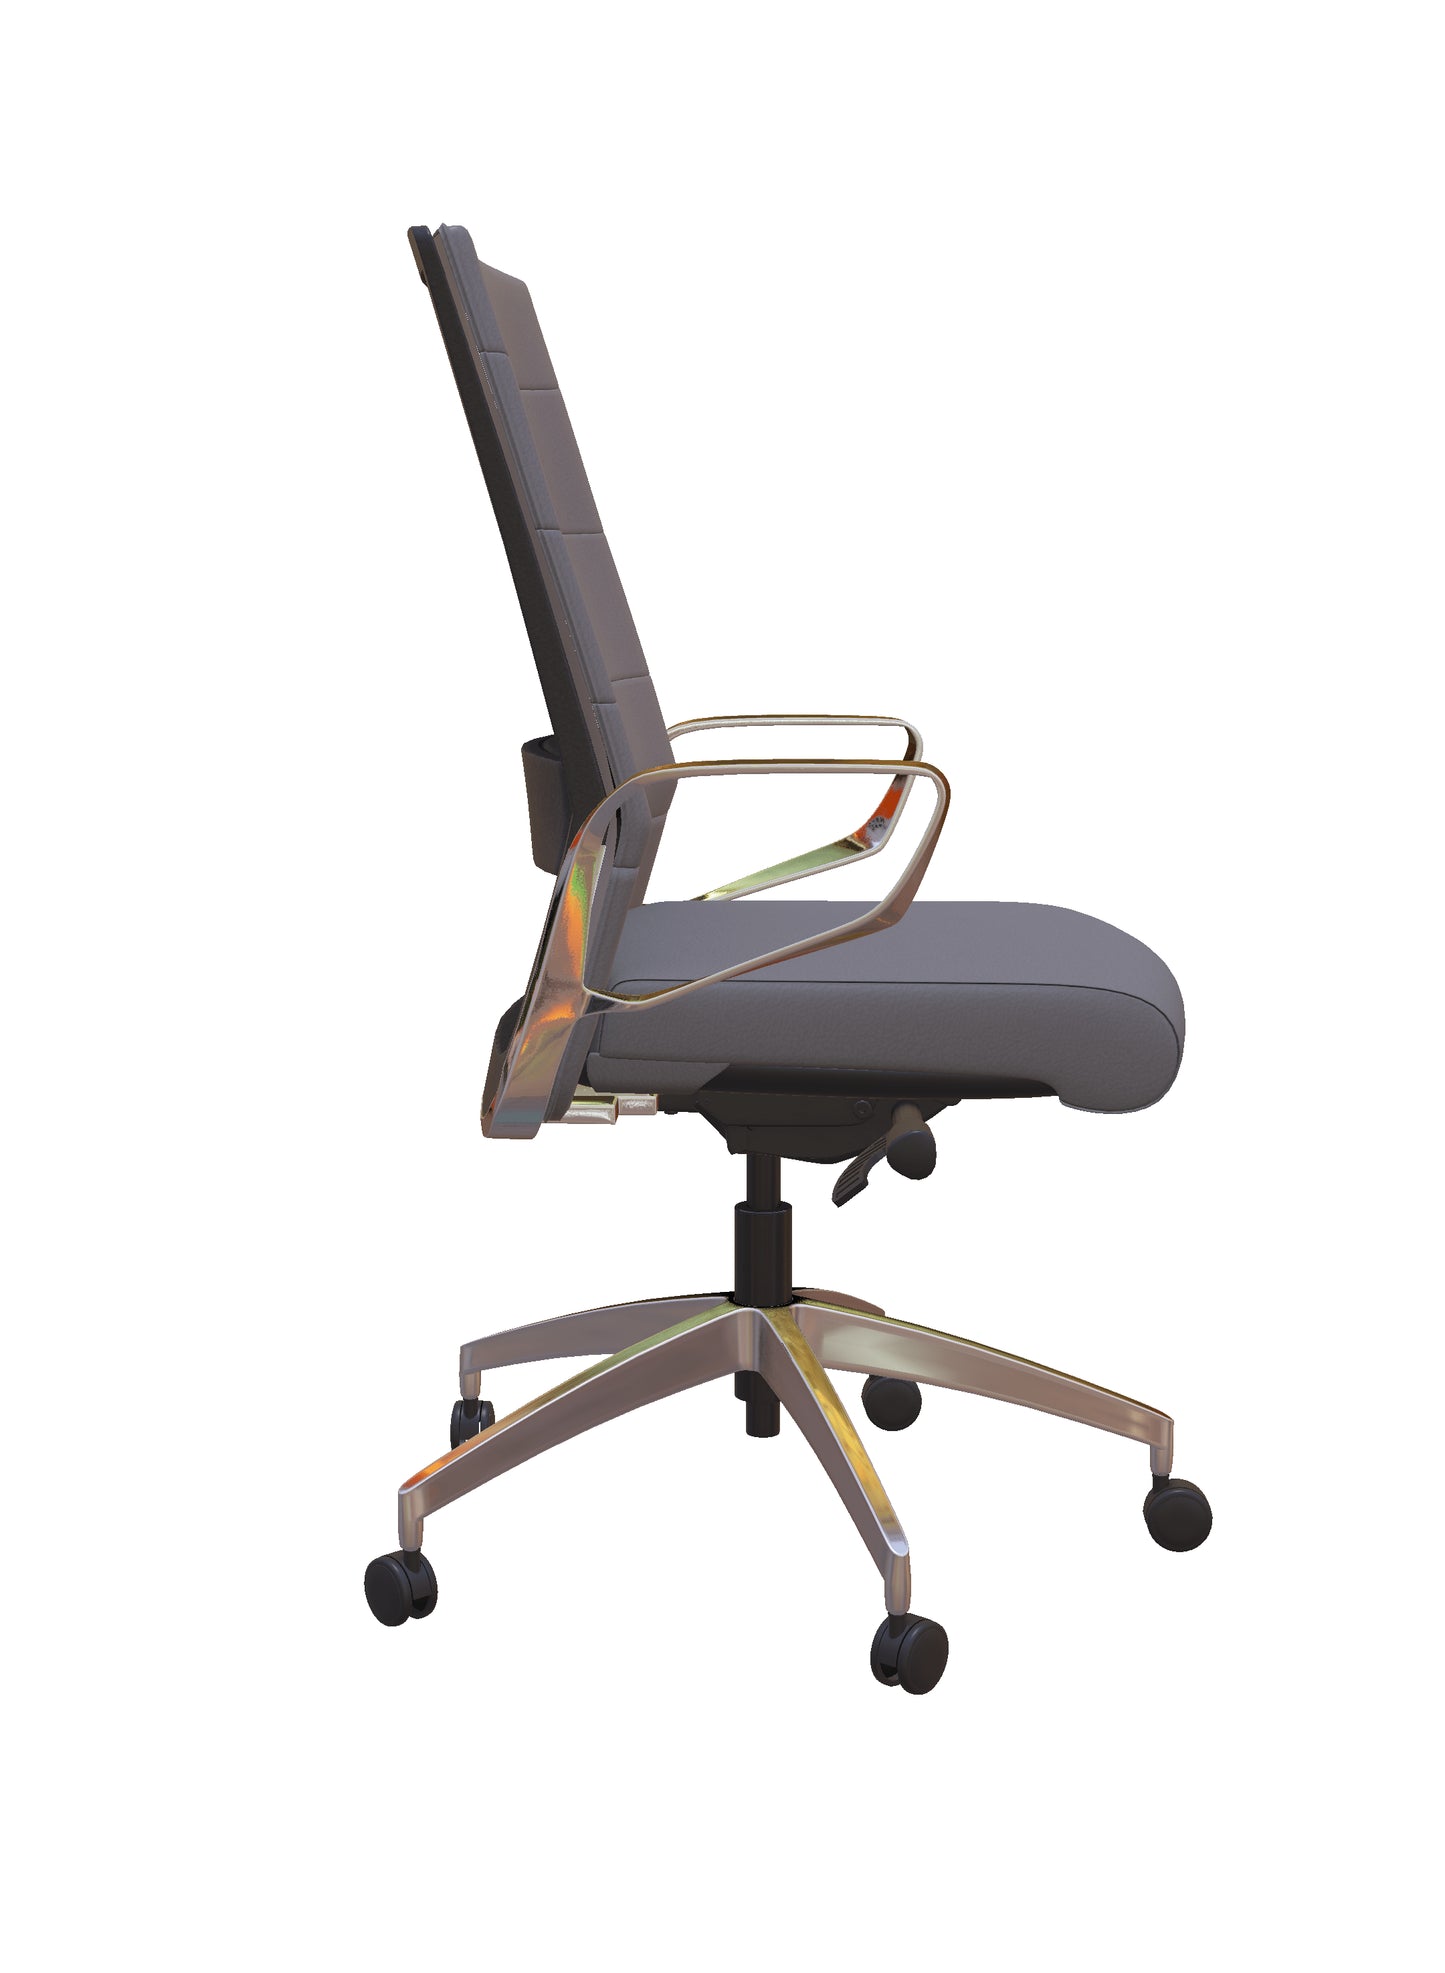 Freeride Executive Leather Conference Chair